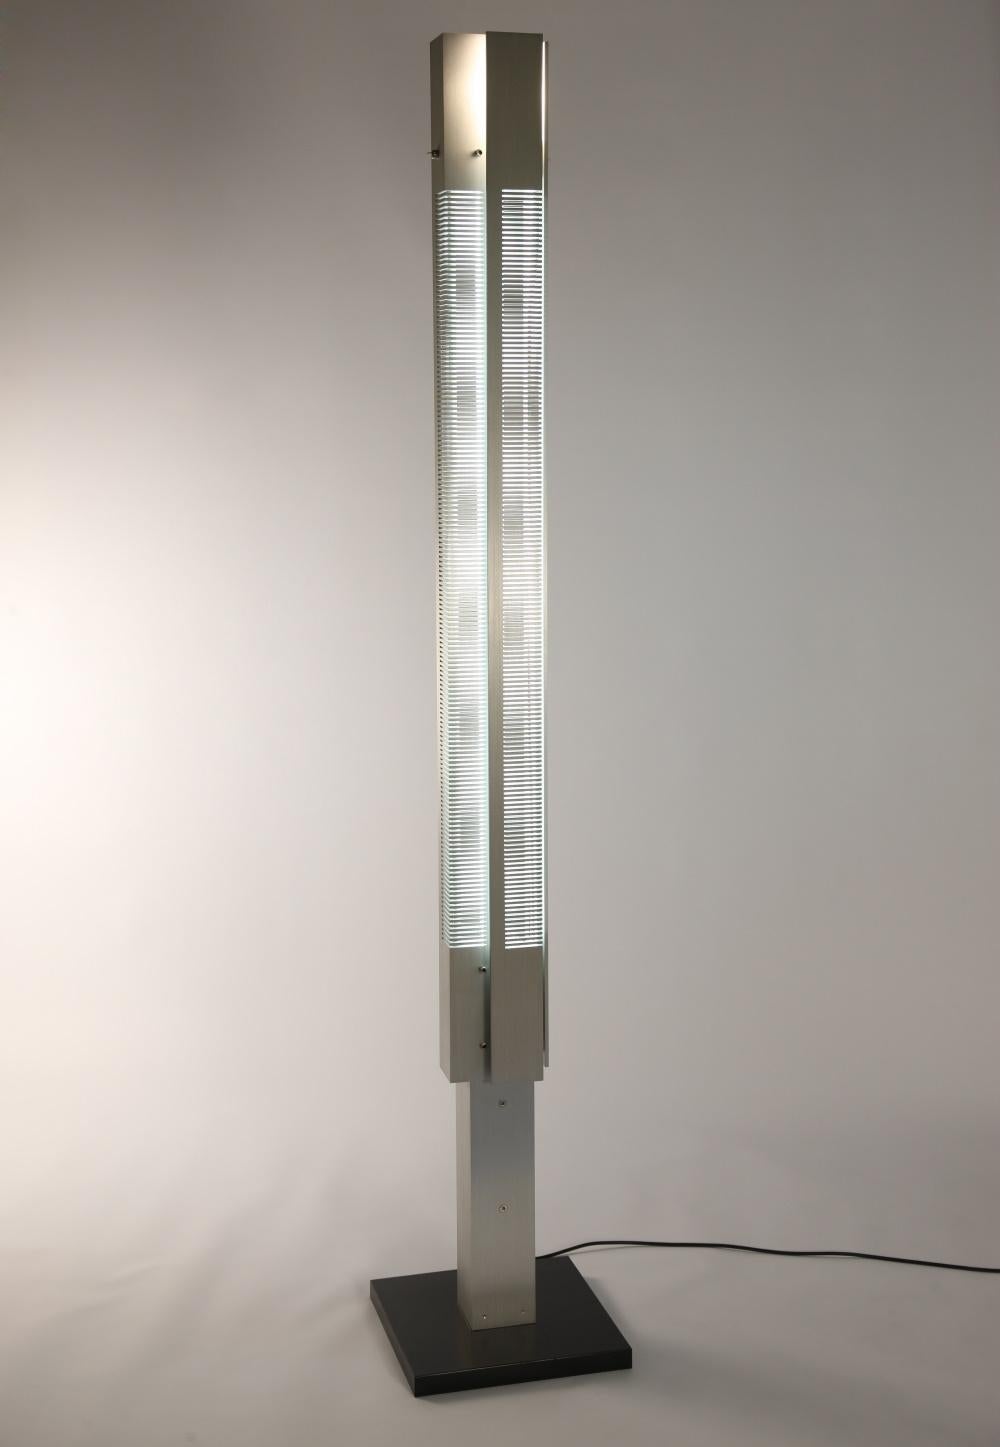 10 years after producing his famous first designs, Mouille departed from naturalism and created a series of lighted columns, among them the large and small signals. The signals combine incandescent and fluorescent lighting effects which glow through